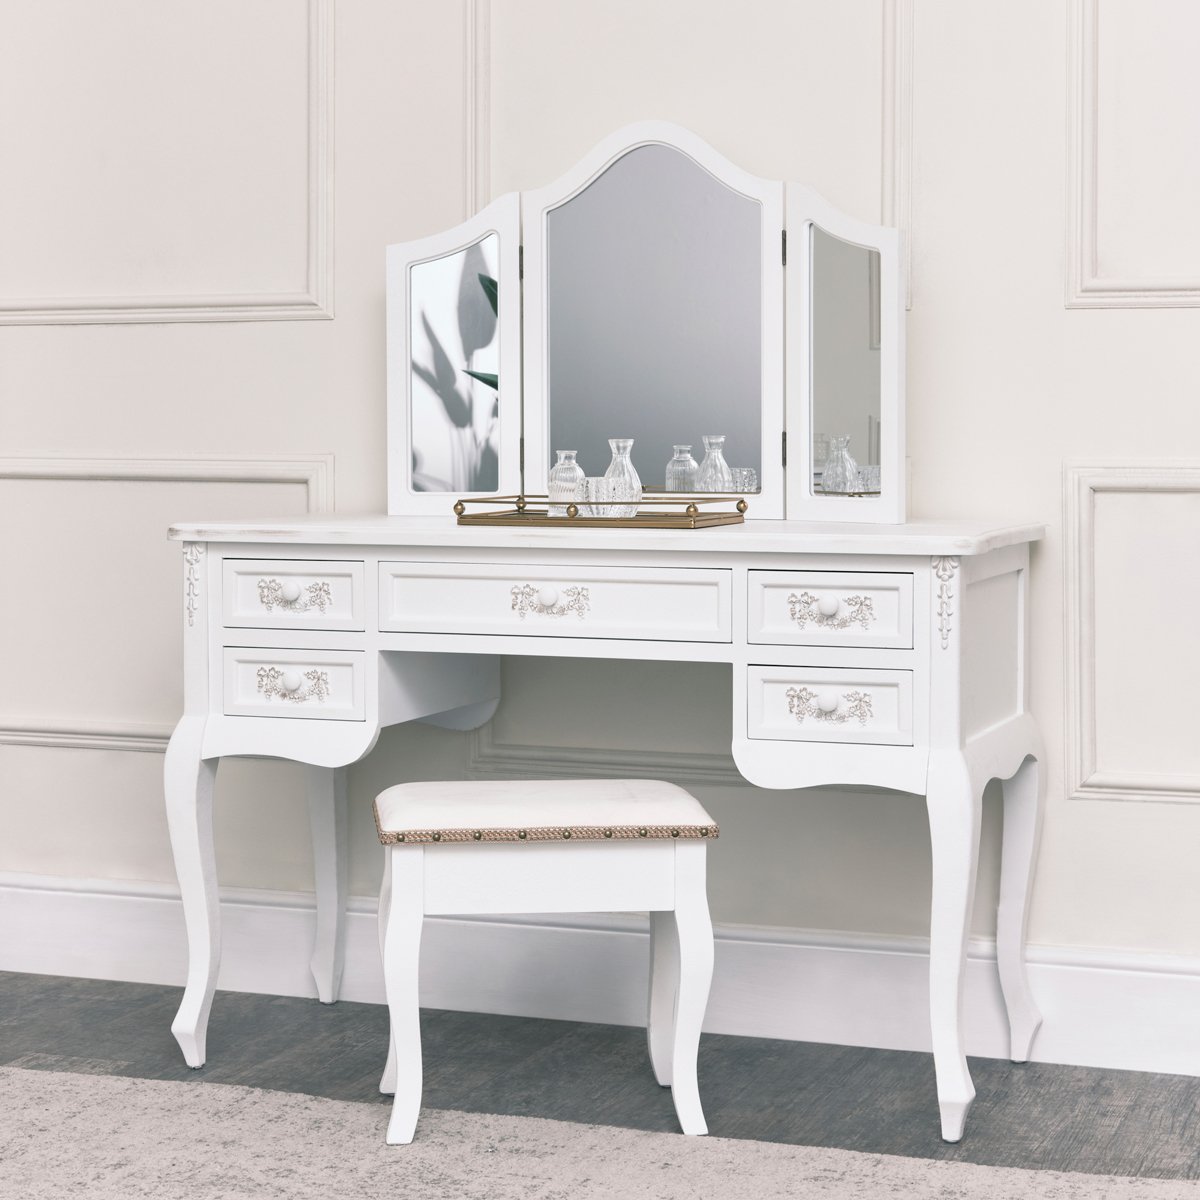 Large Double Wardrobe, Dressing Table Set & Pair of 3 Drawer Bedside Tables - Pays Blanc Range 